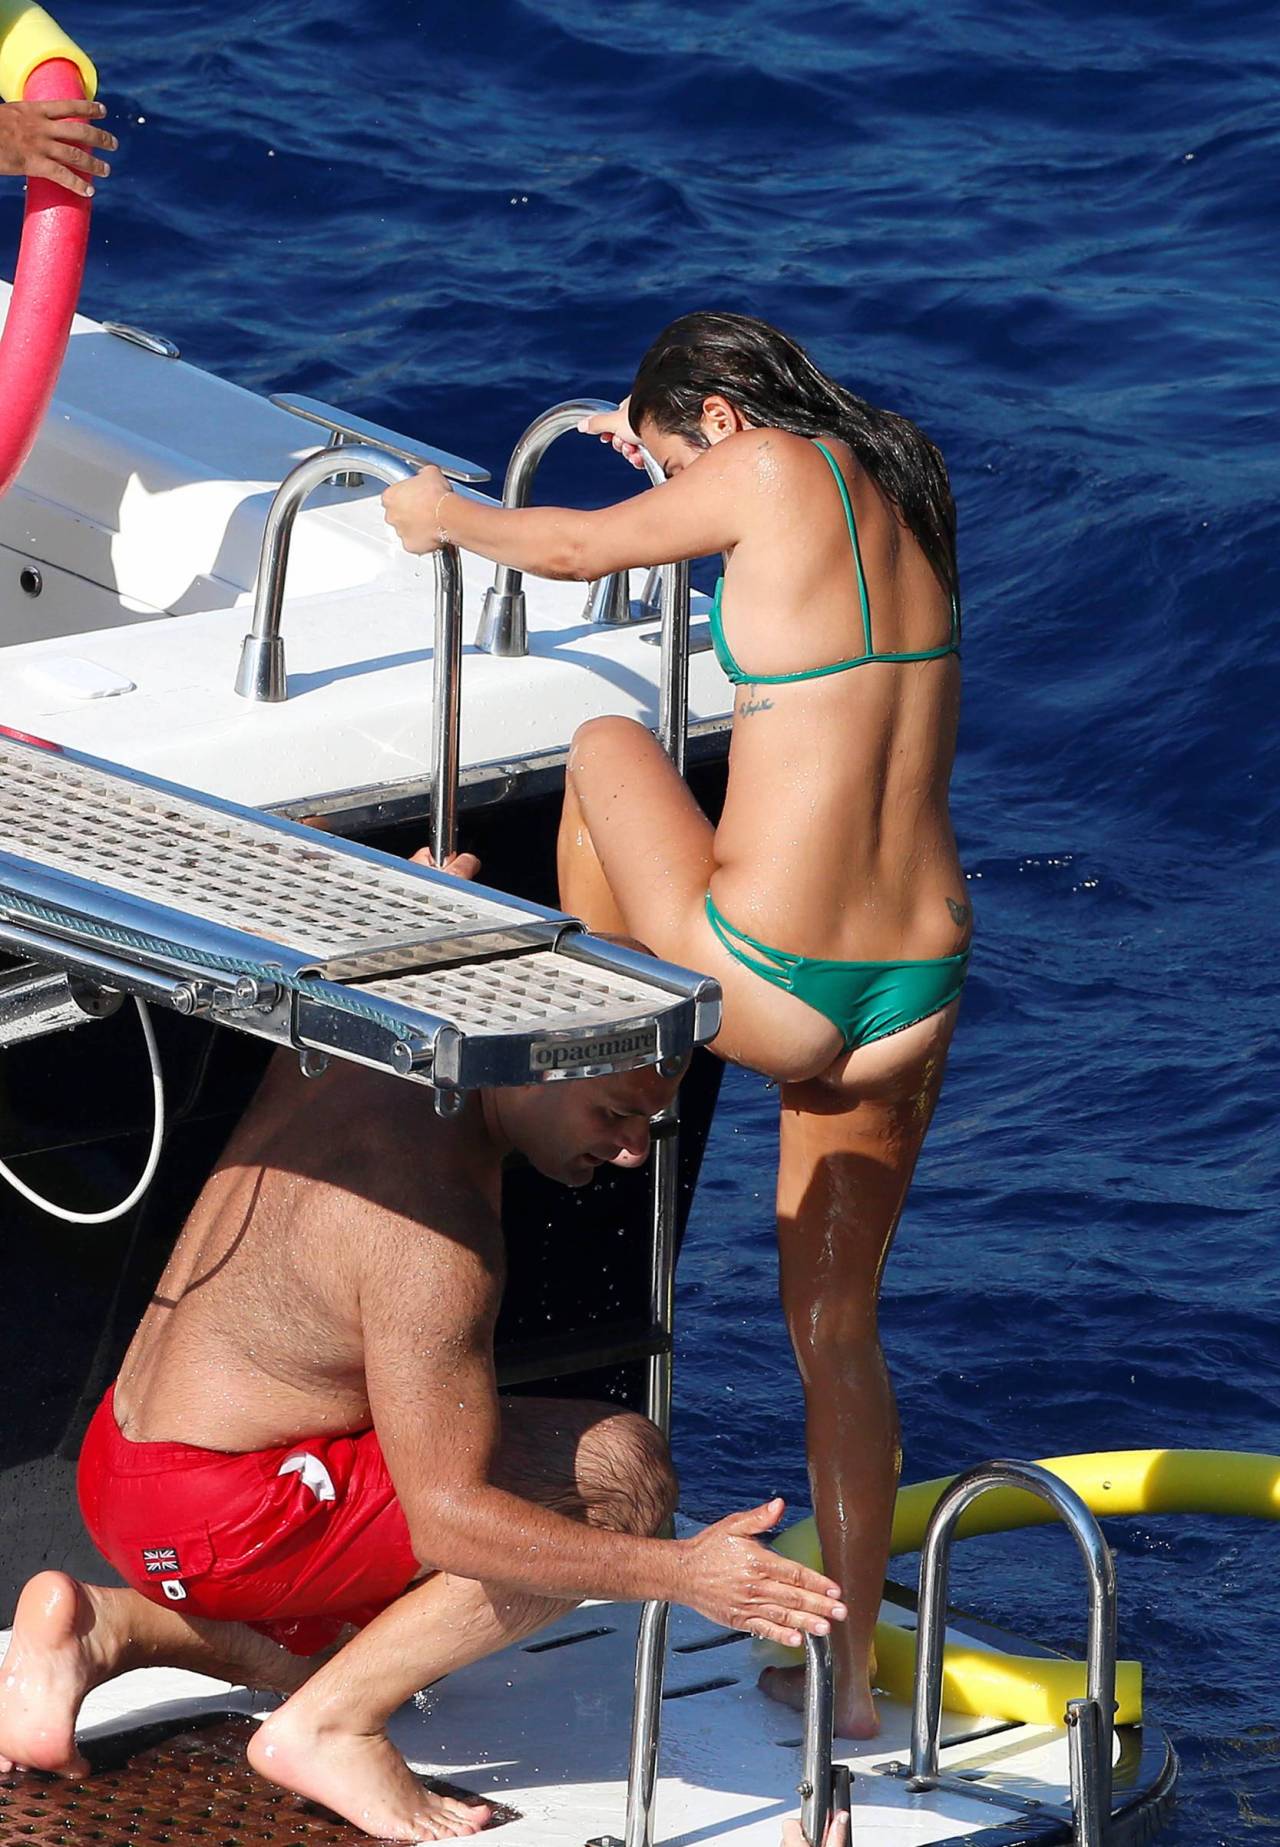 toplessbeachcelebs:  Lea Michele (Actress) nipple slip while swimming in Italy